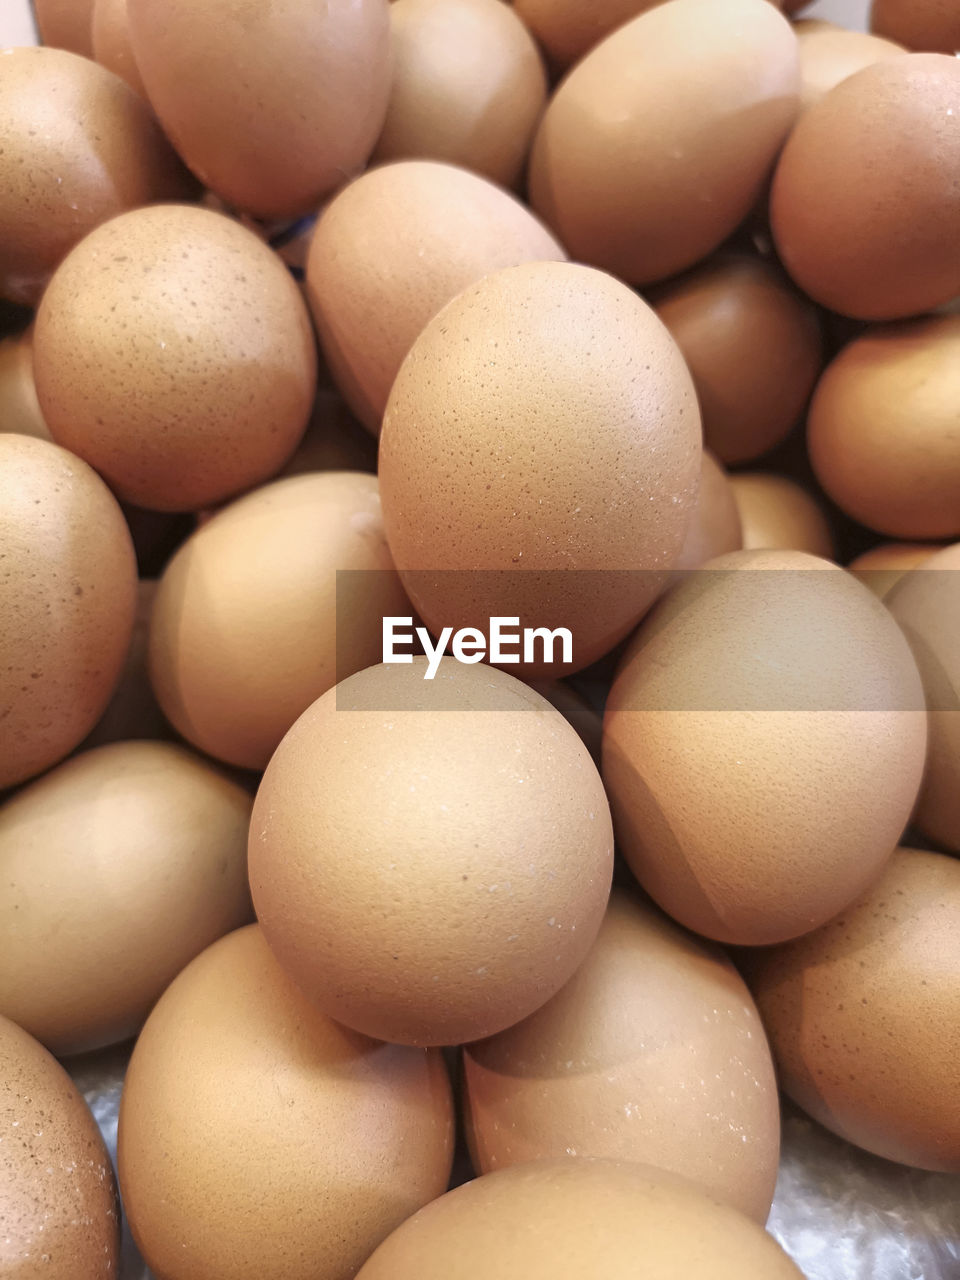 Background of fresh eggs for sale at a market